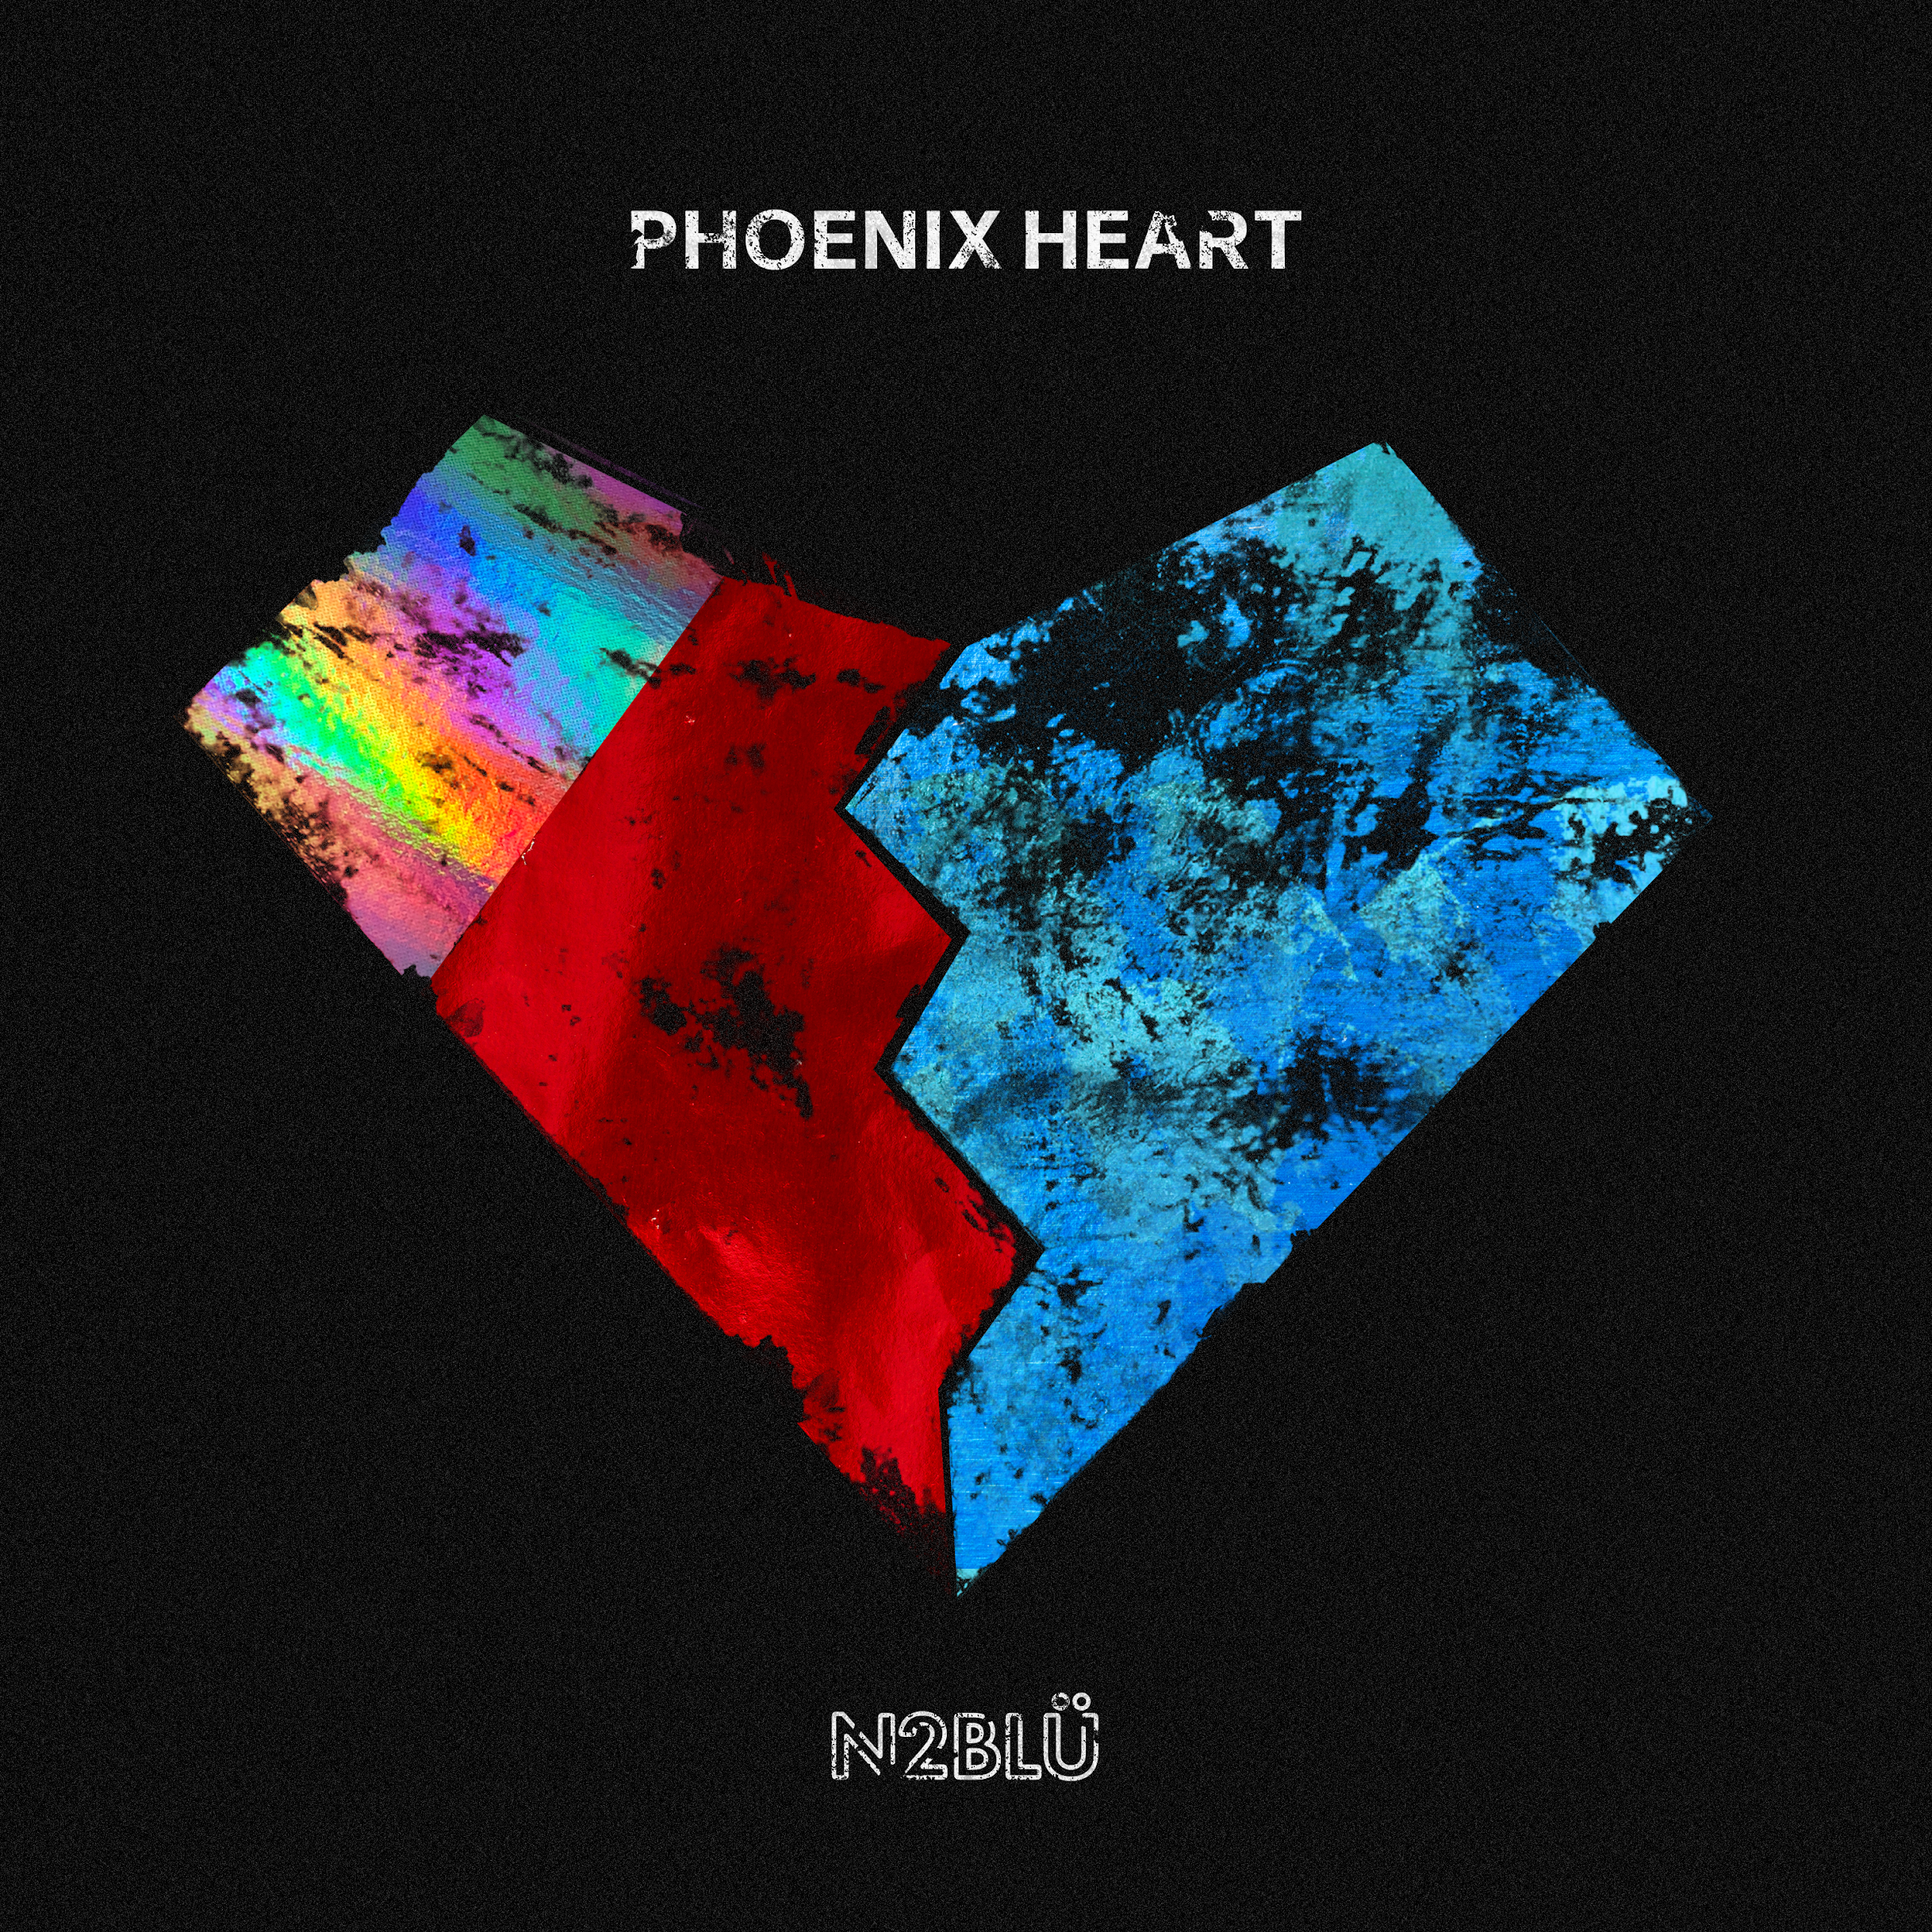 NSE EDM: N2BLÜ are back with an entrancing and warm ‘Phoenix Heart